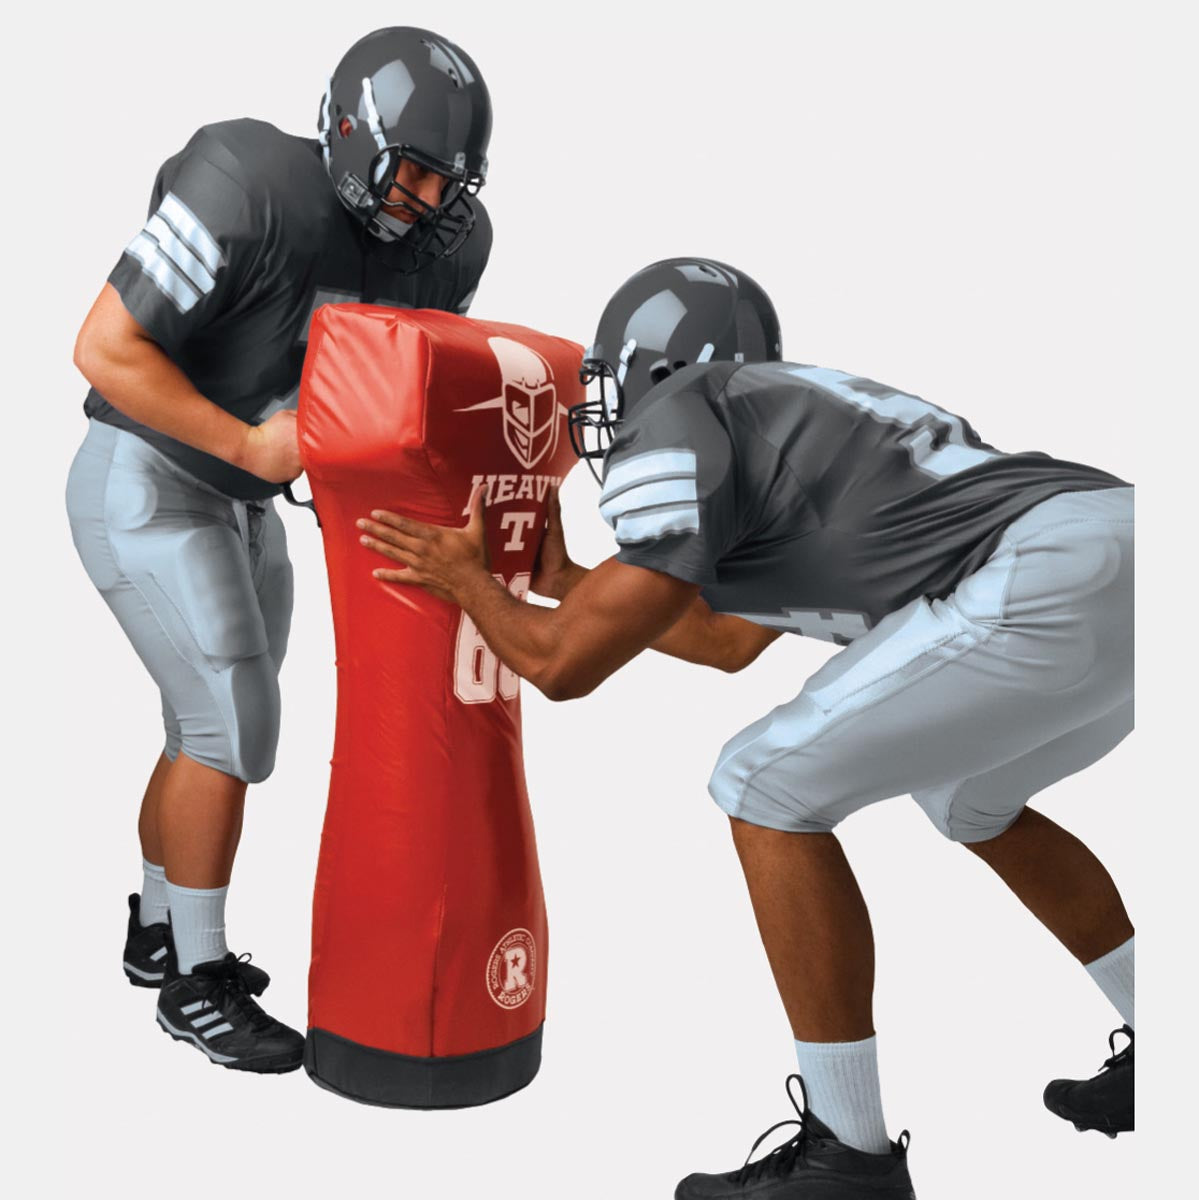 Rogers Athletic Heavy T Stand Up Football Blocking Dummy